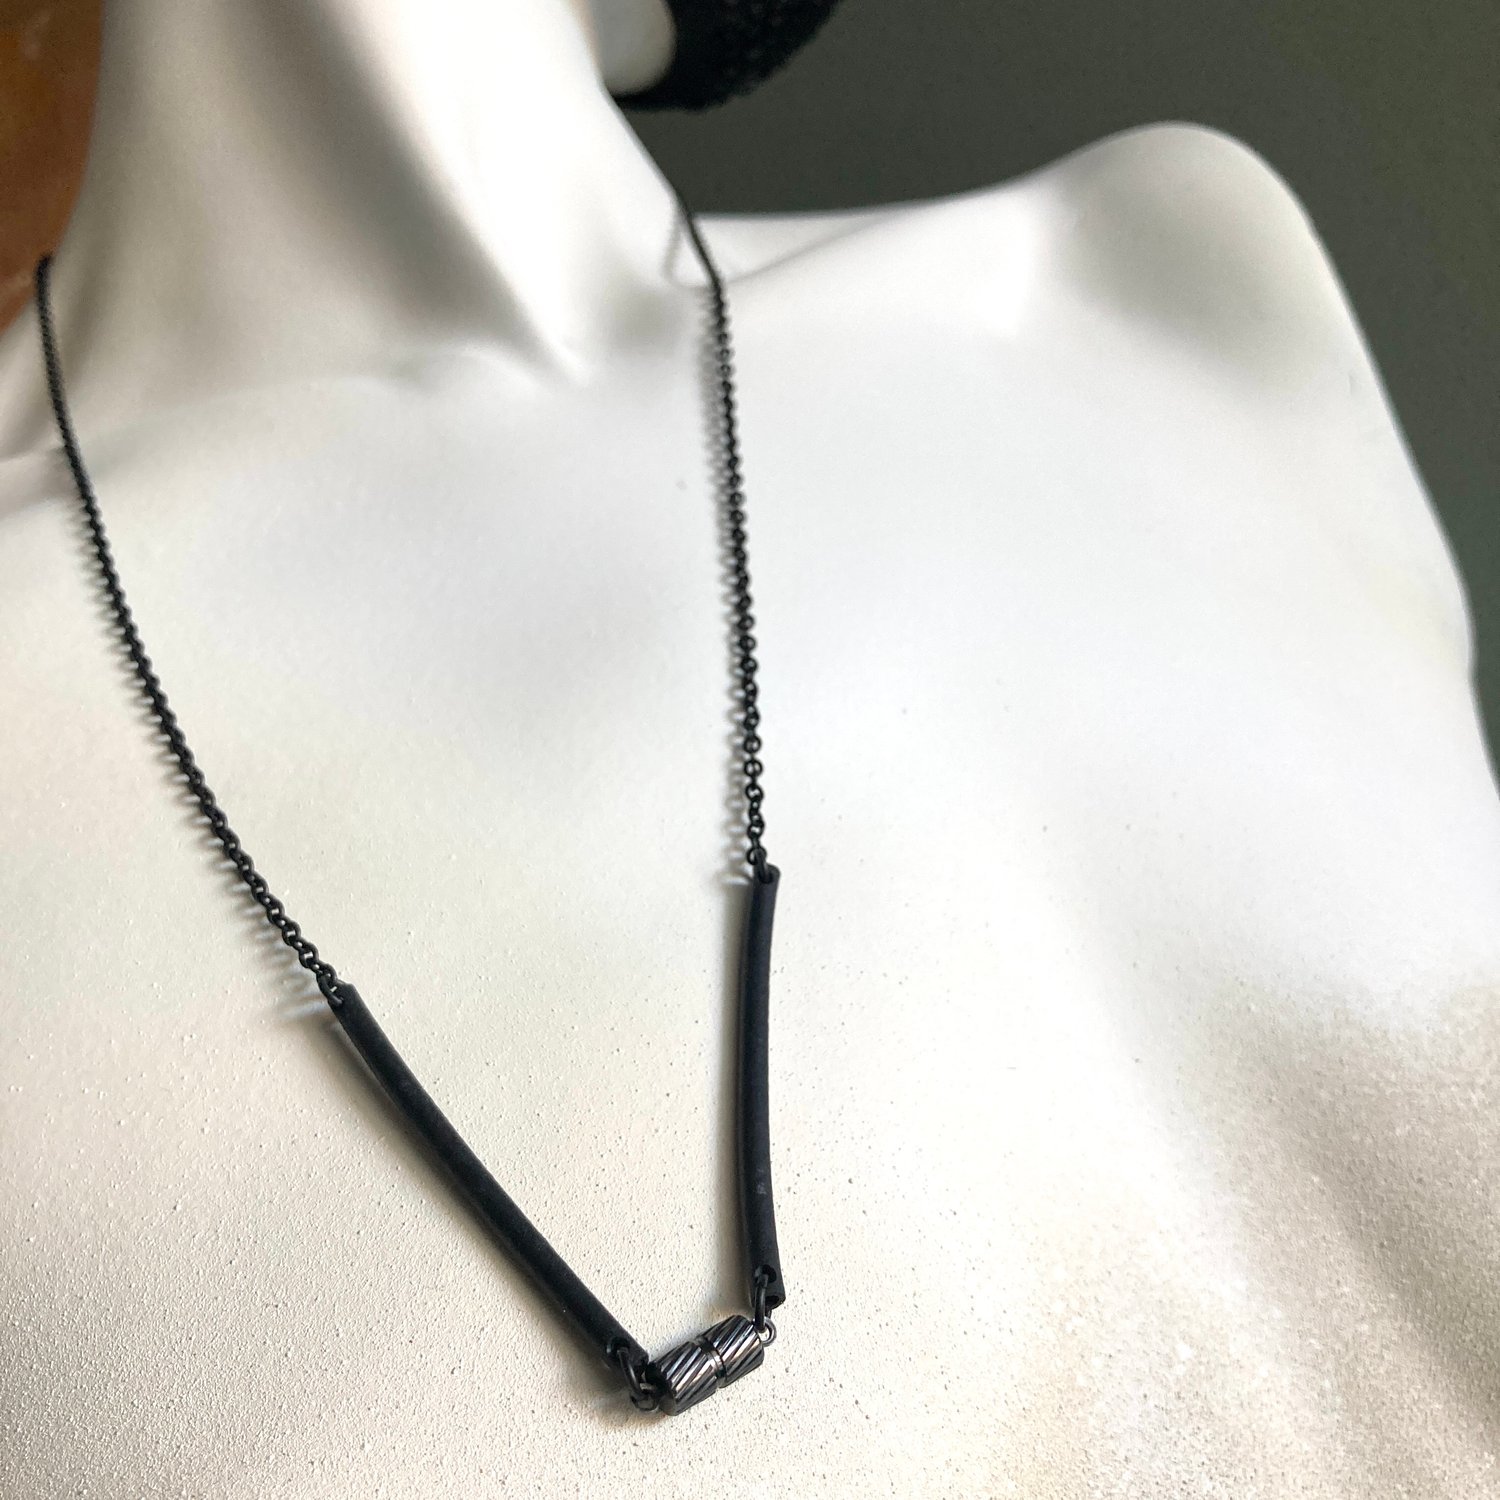 Image of 26.5" Black Stainless and Rubber Convertible Necklace/Mask Chain with Gunmetal Barrel Magnet Clasp